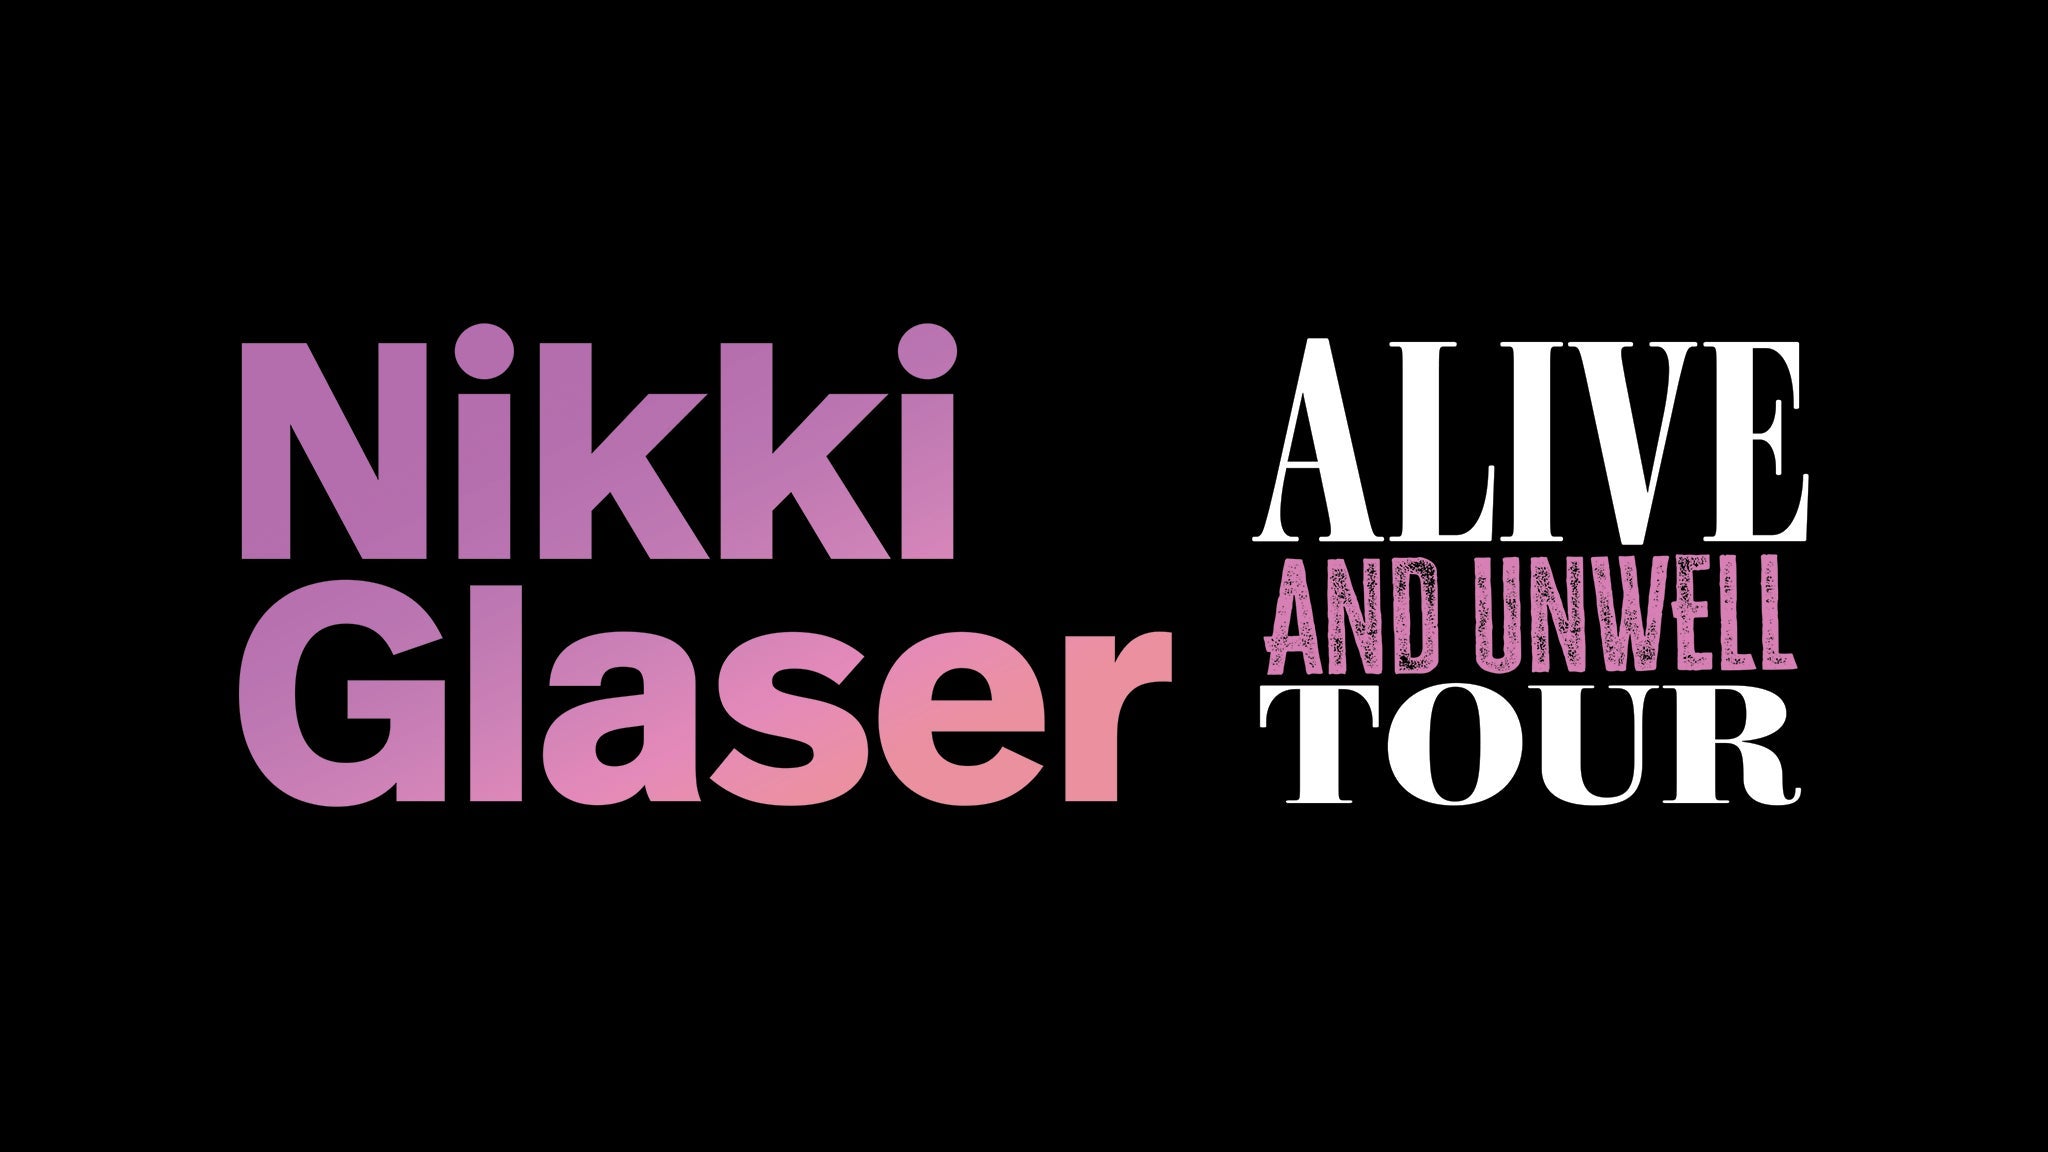 Nikki Glaser: Alive And Unwell Tour pre-sale code for early tickets in Baraboo